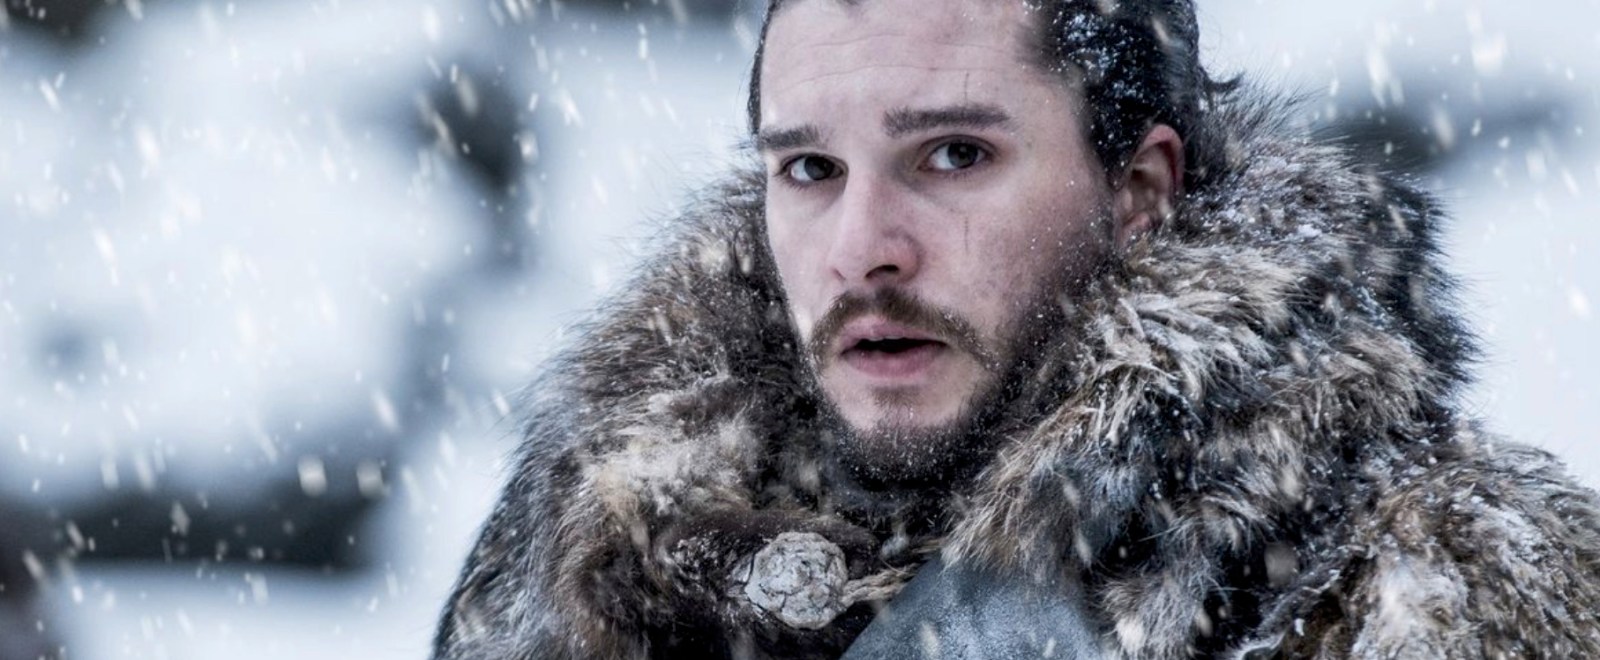 The ‘Game Of Thrones’ Spinoff Show About Jon Snow Is No Longer In Development